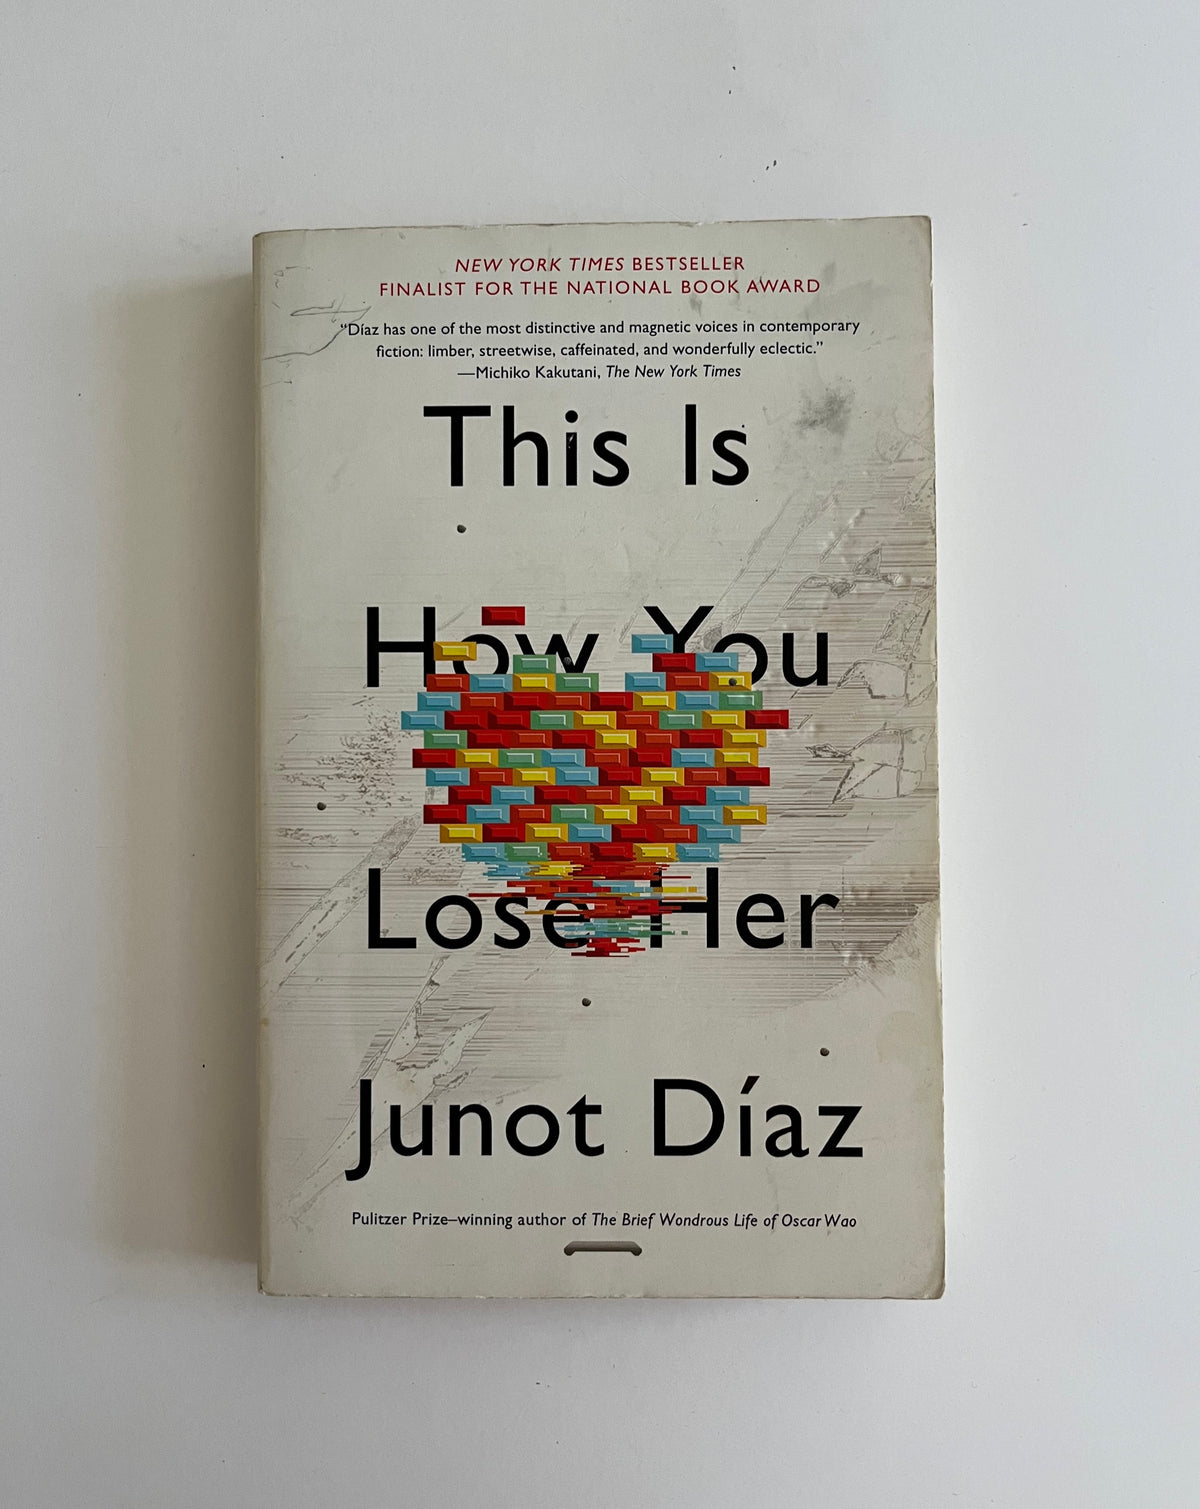 This is How You Lose Her by Junot Diaz